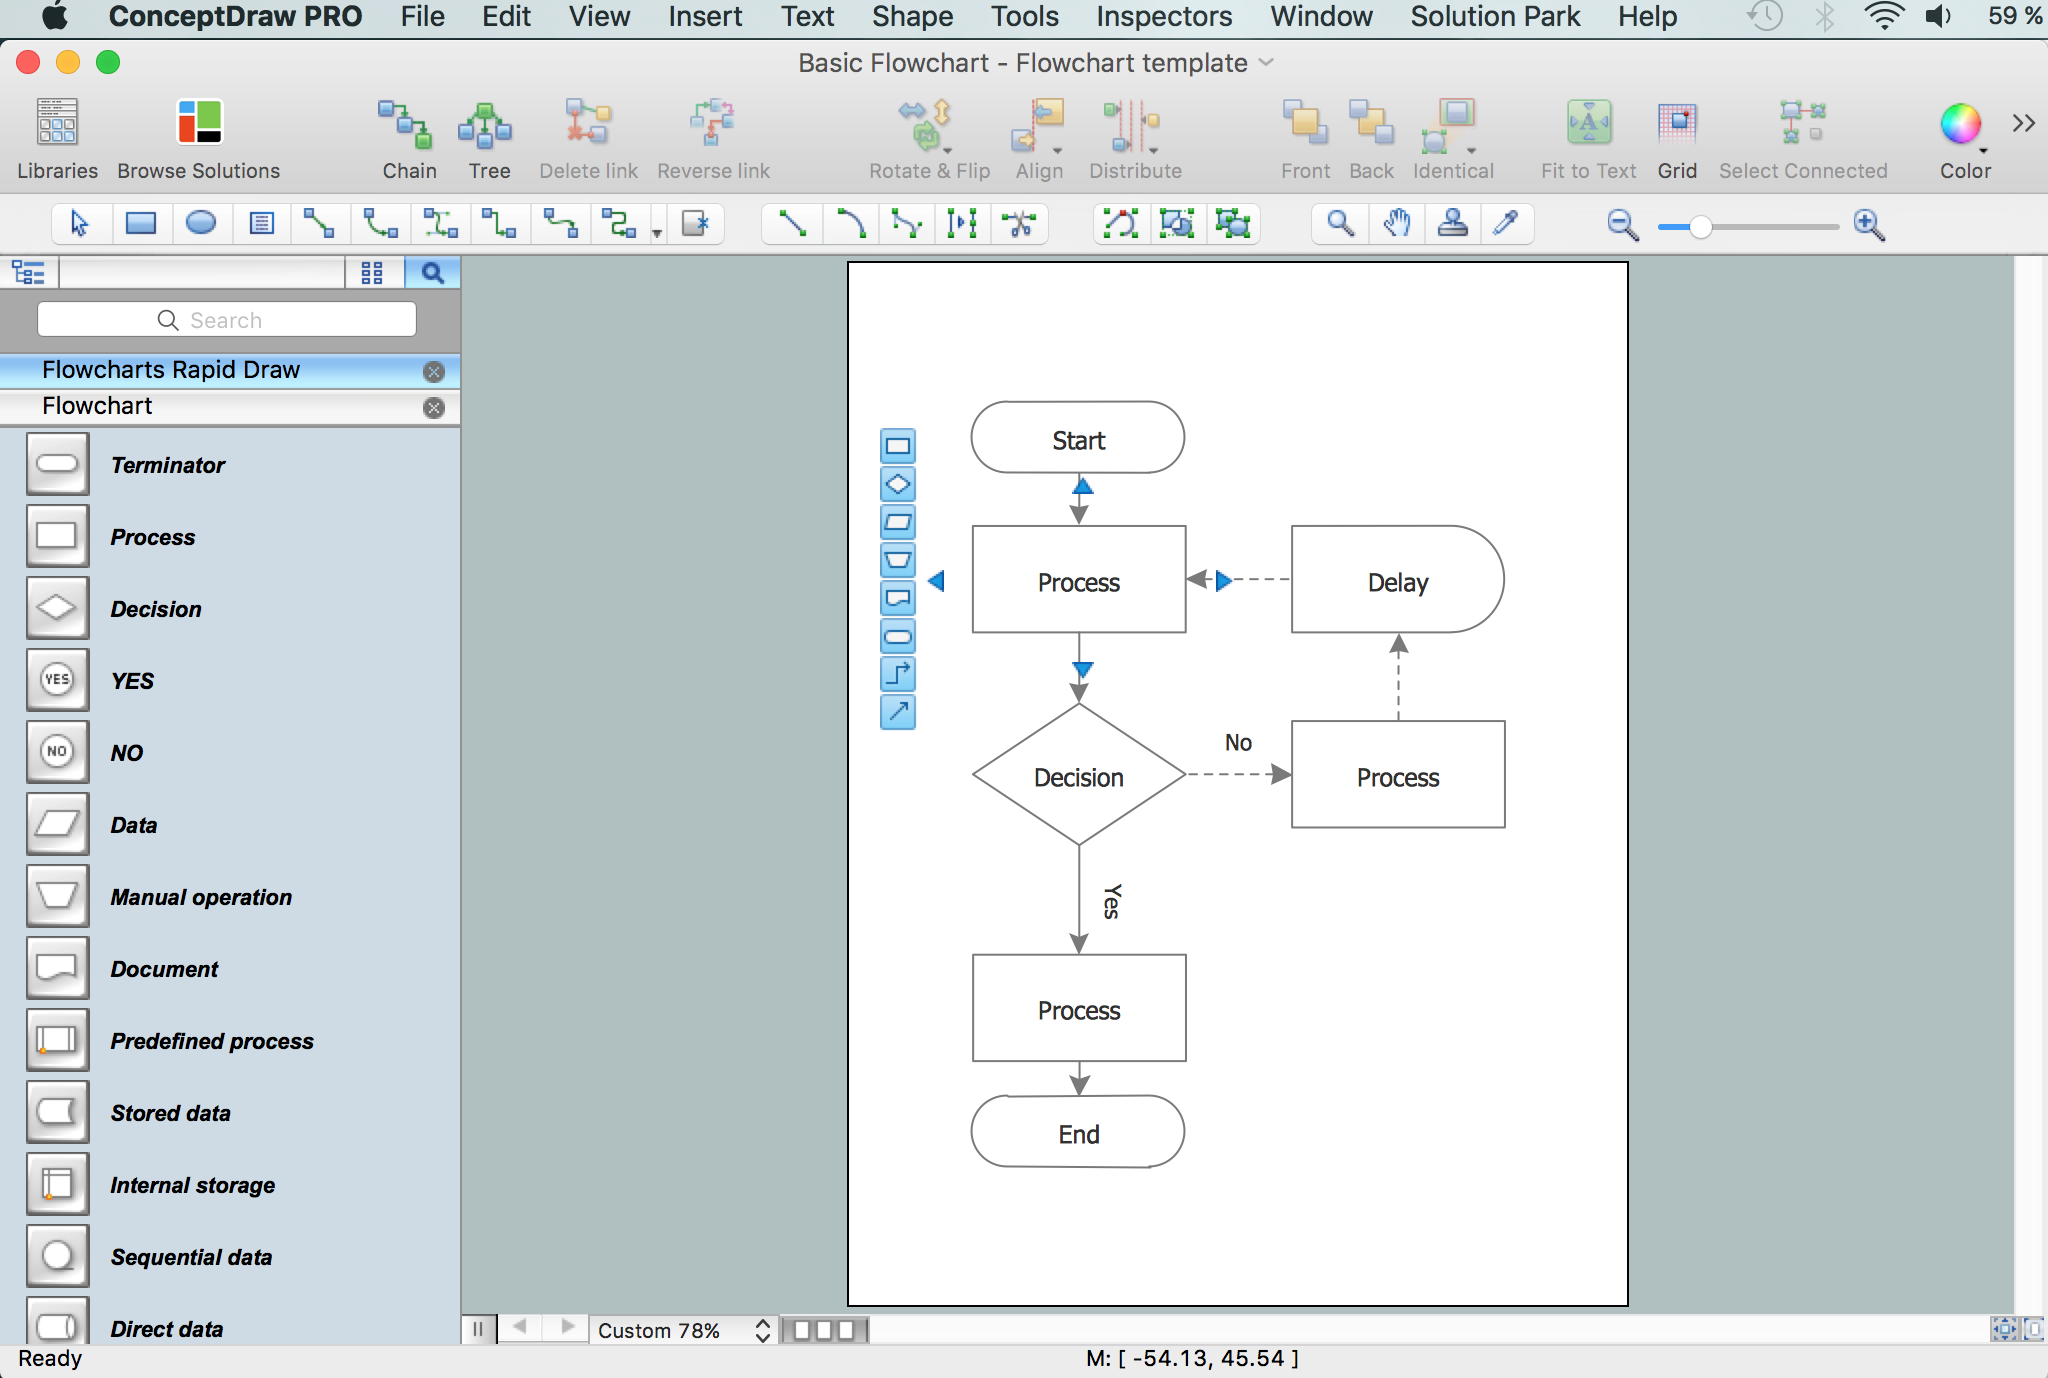 How To Create a FlowChart using ConceptDraw | Free Trial for Mac & PC